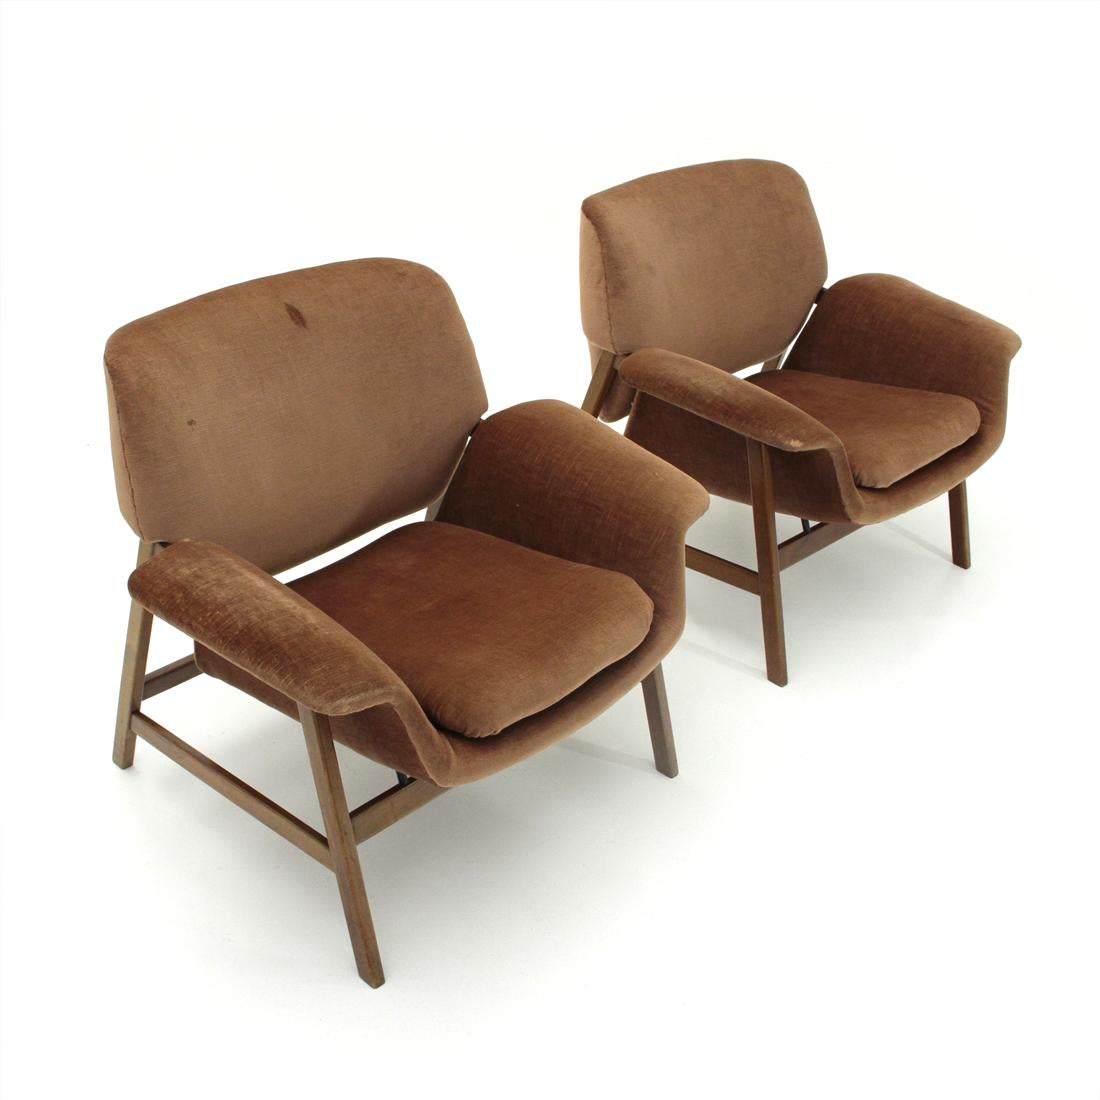 Pair of armchairs produced in the 1950s by Cassina, based on a project by Gianfranco Frattini.
Wooden structure.
Back and seat shell in bent wood upholstered in velvet, original of the time.
Padded cushion on the seat.
Metal spacers.
Good